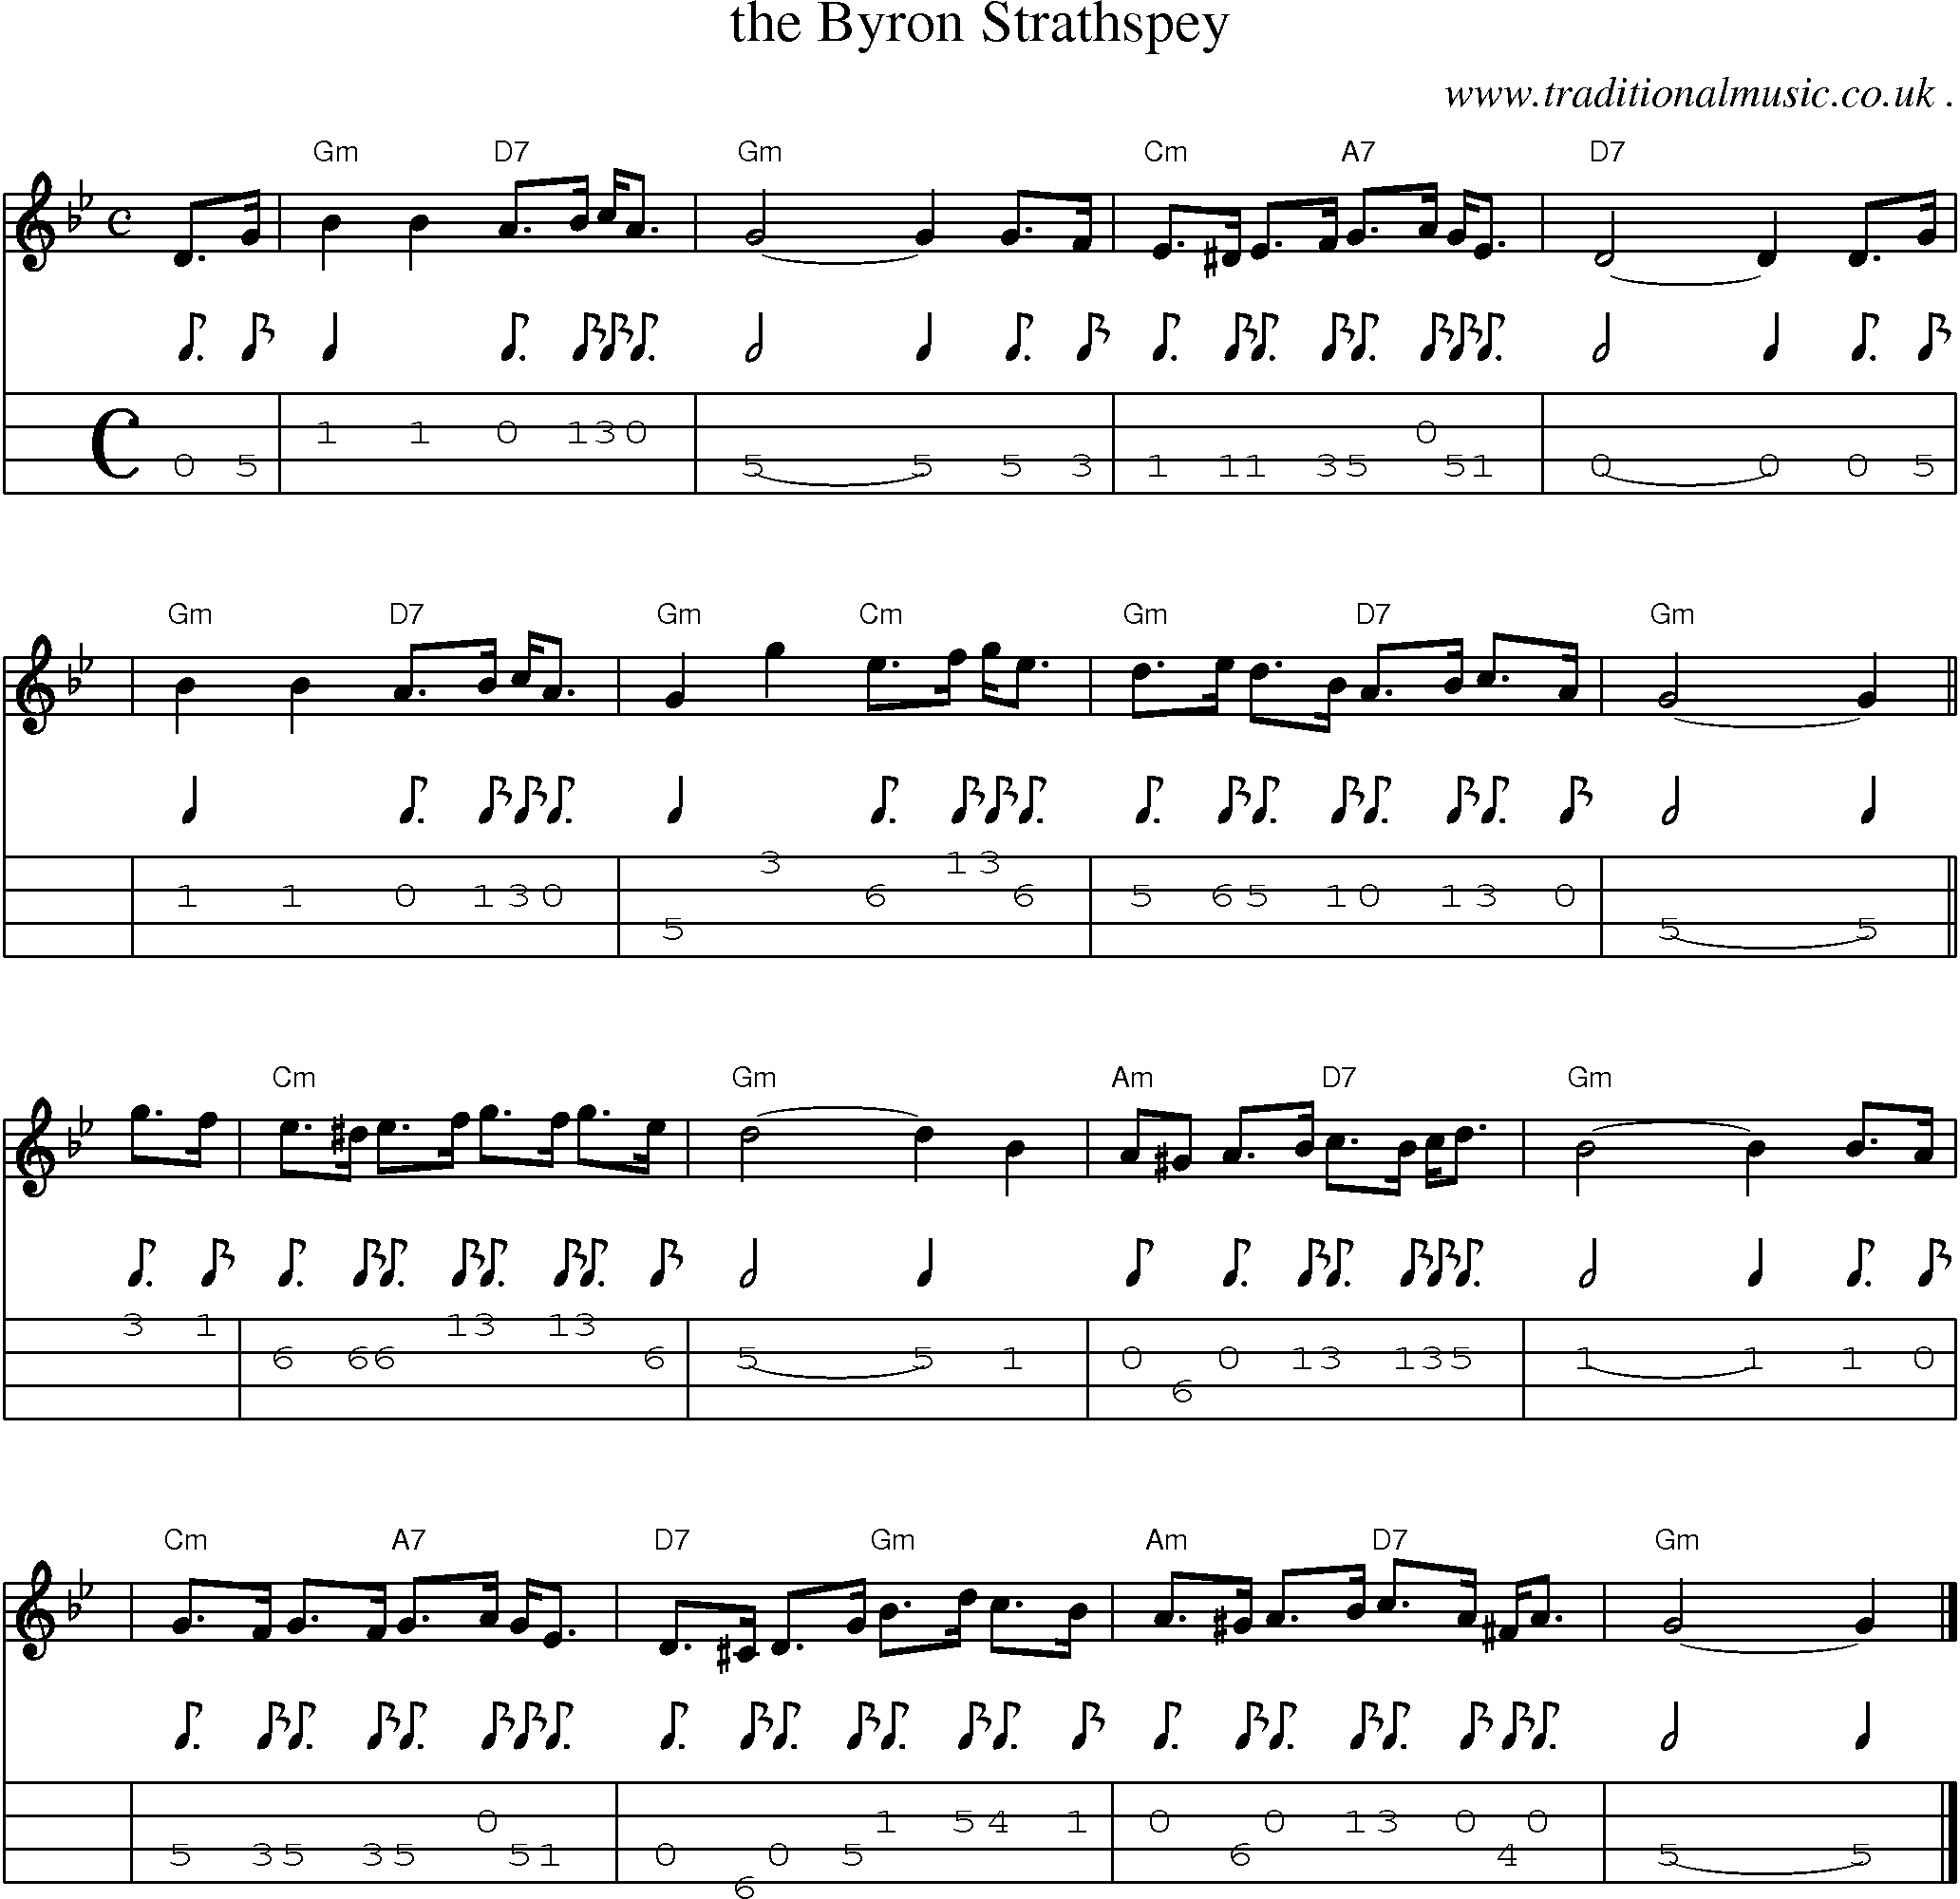 Sheet-music  score, Chords and Mandolin Tabs for The Byron Strathspey